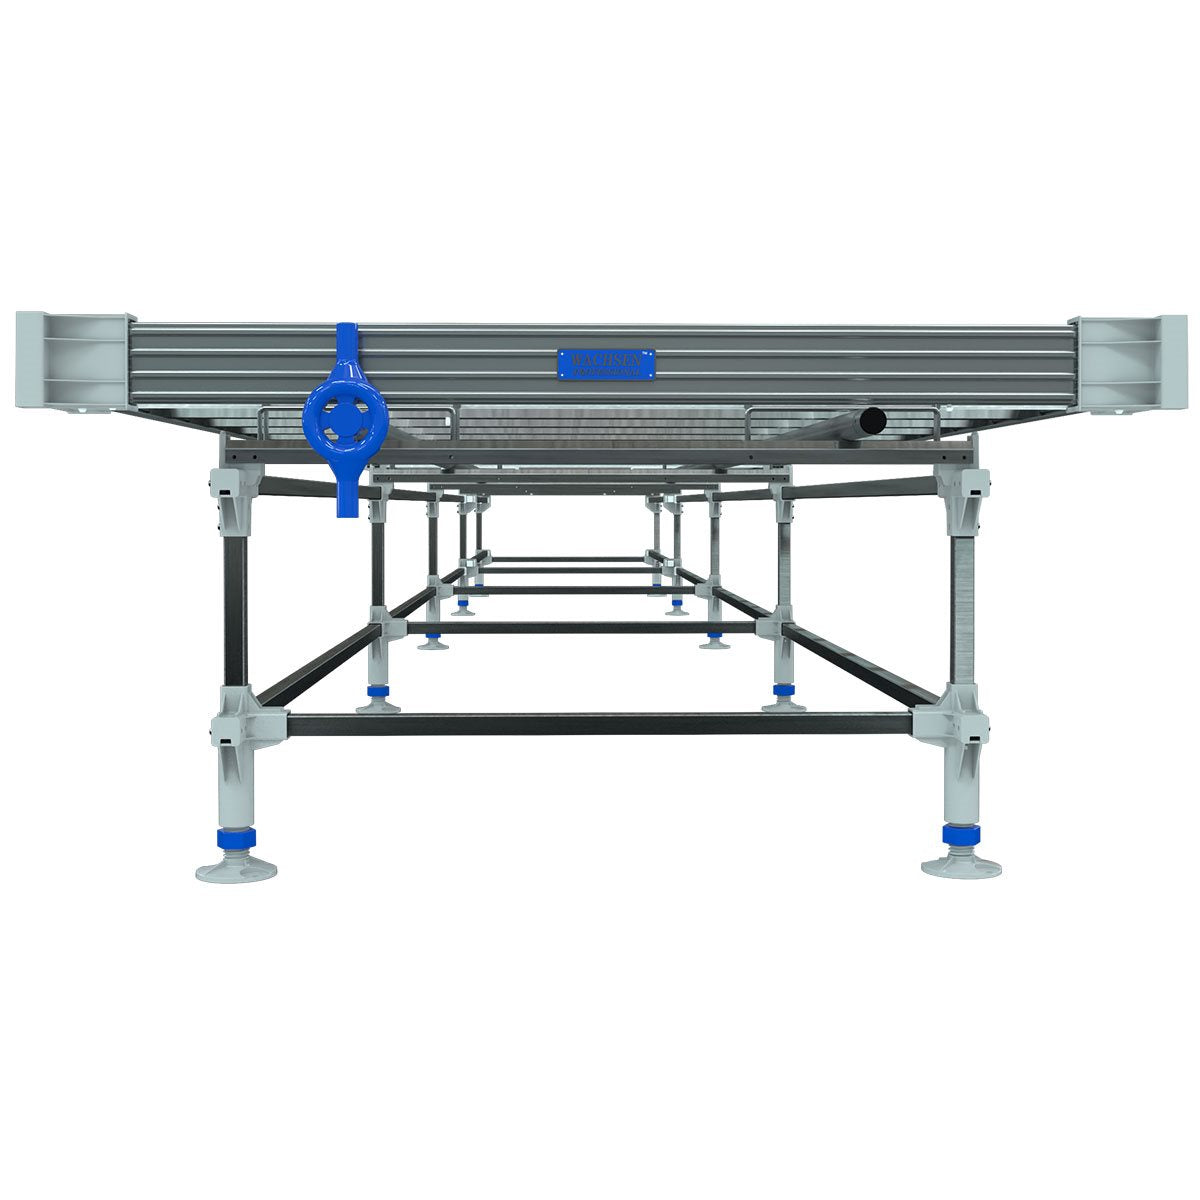 Product Secondary Image:Wachsen Rolling Bench Galvanized 5' Box B